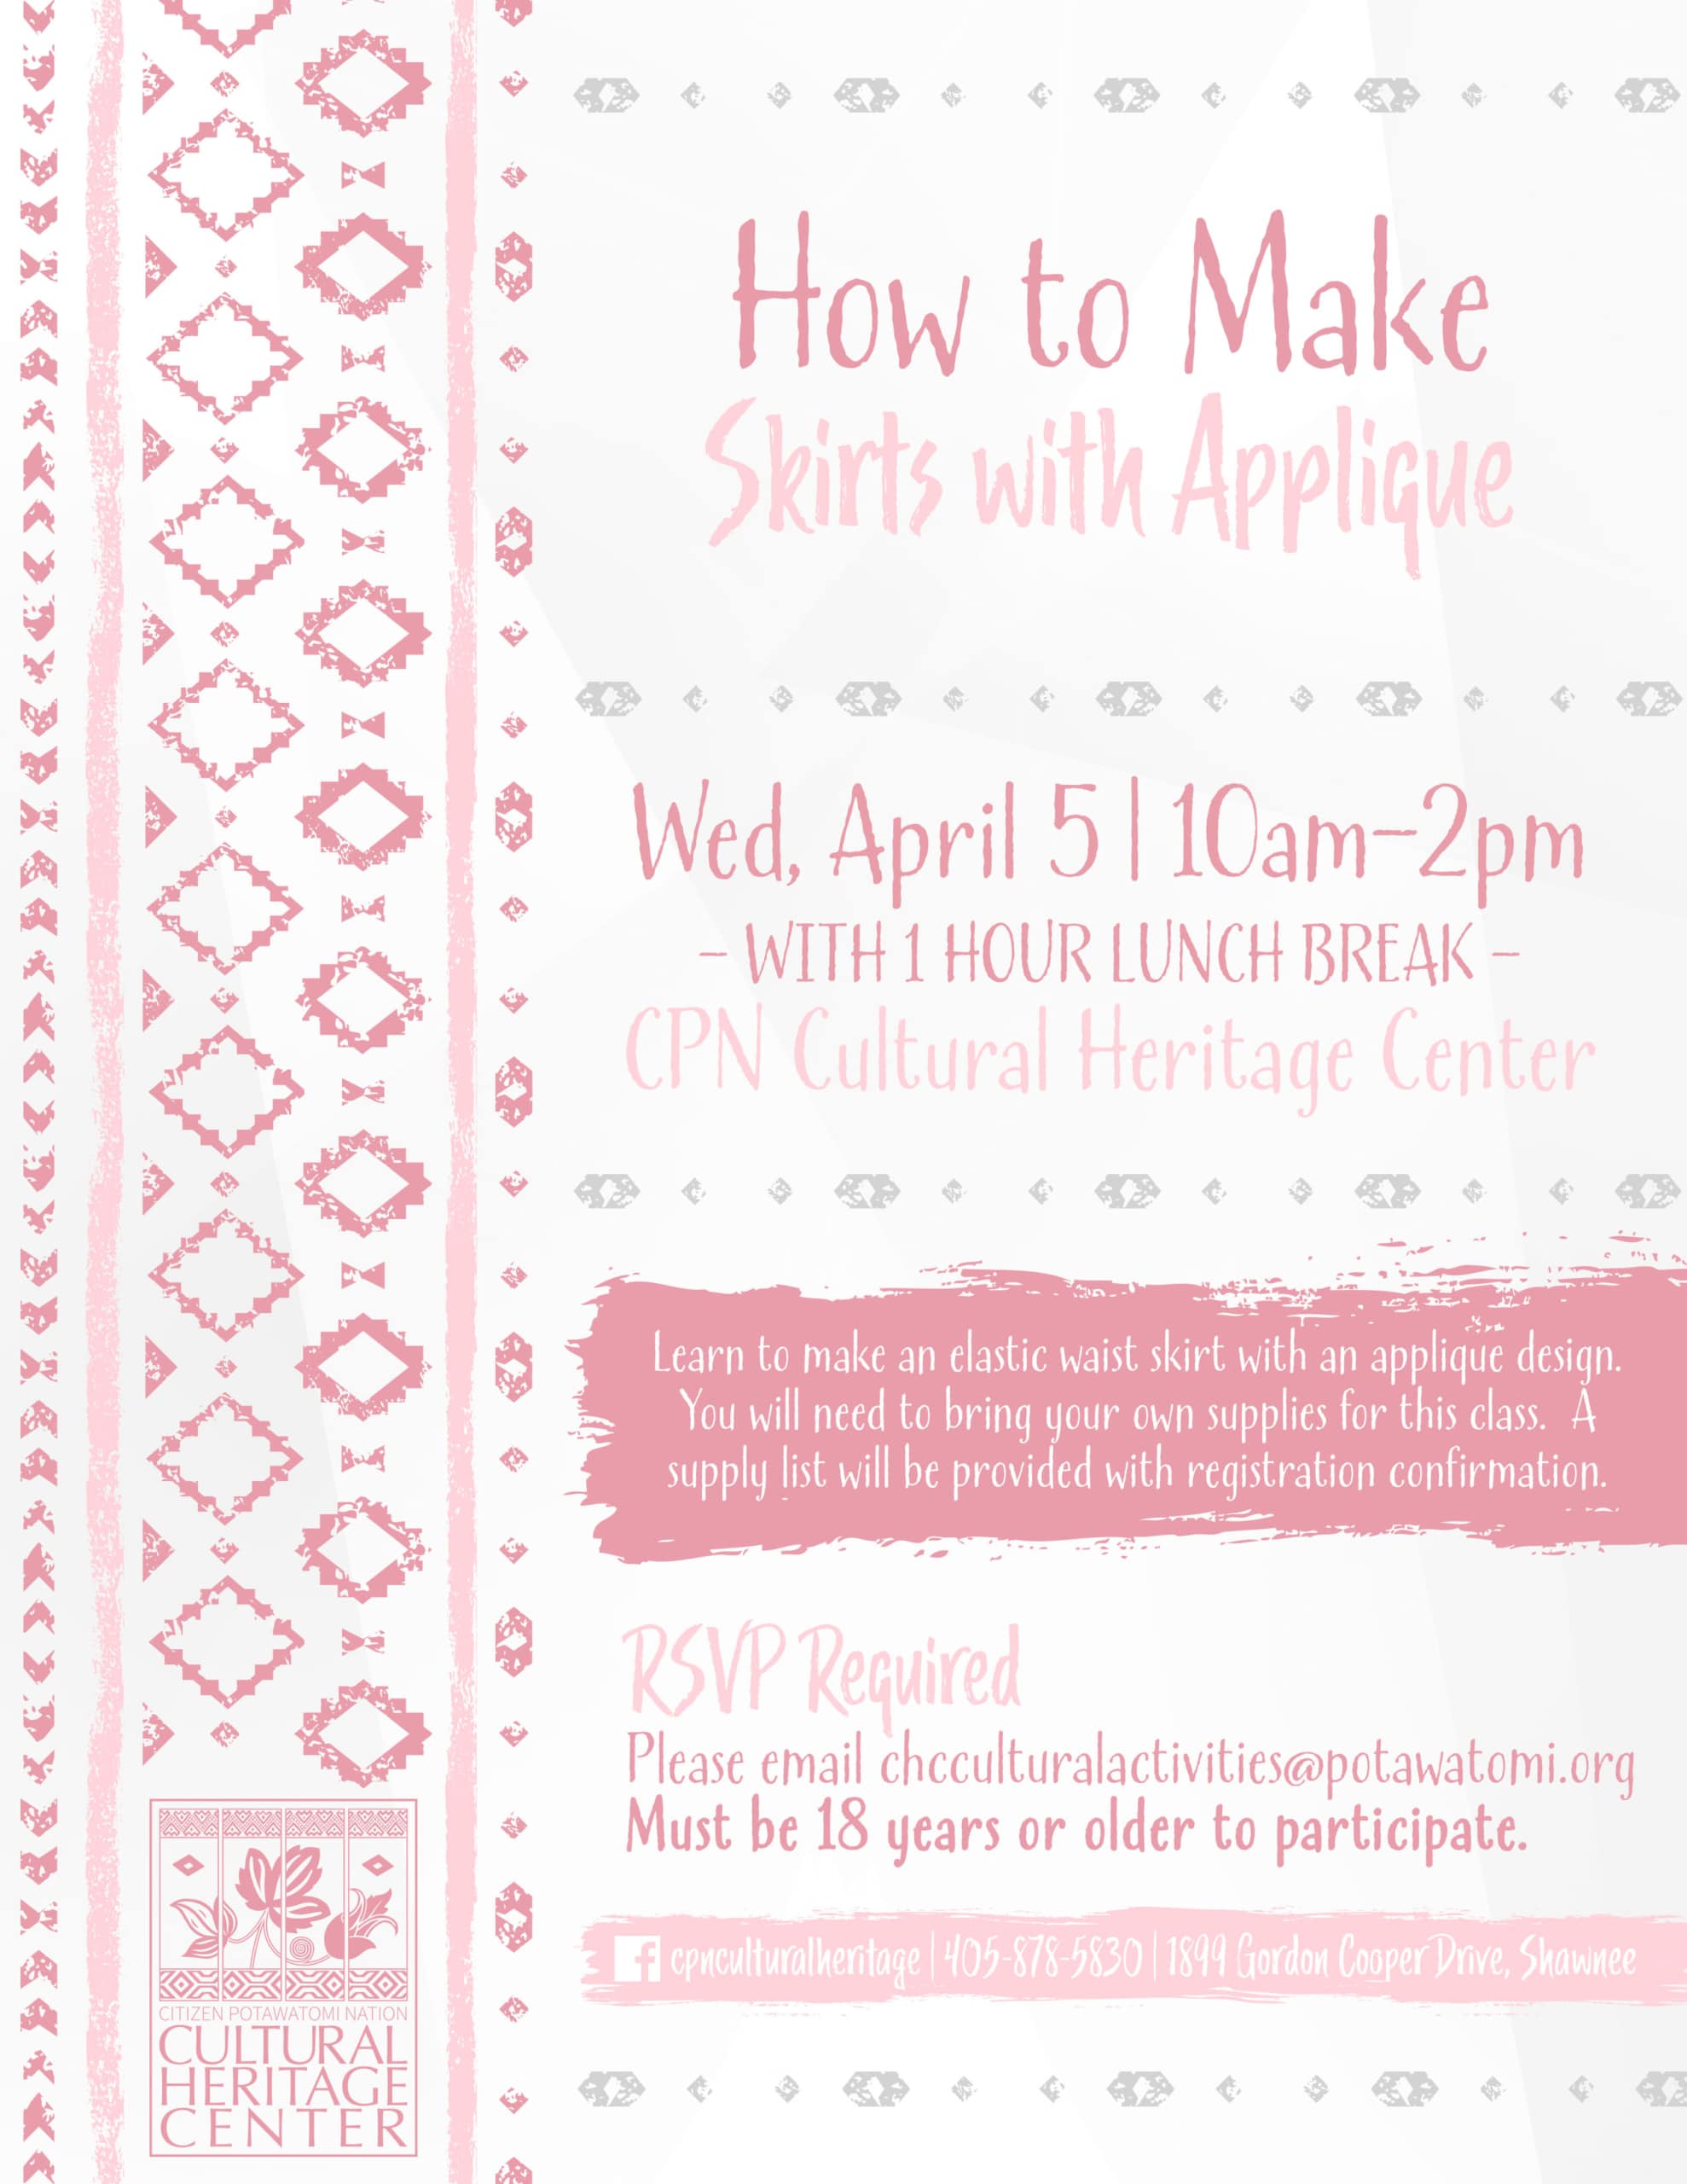 Pink geometric designs frame class details for "How to Make Skirts with Applique."